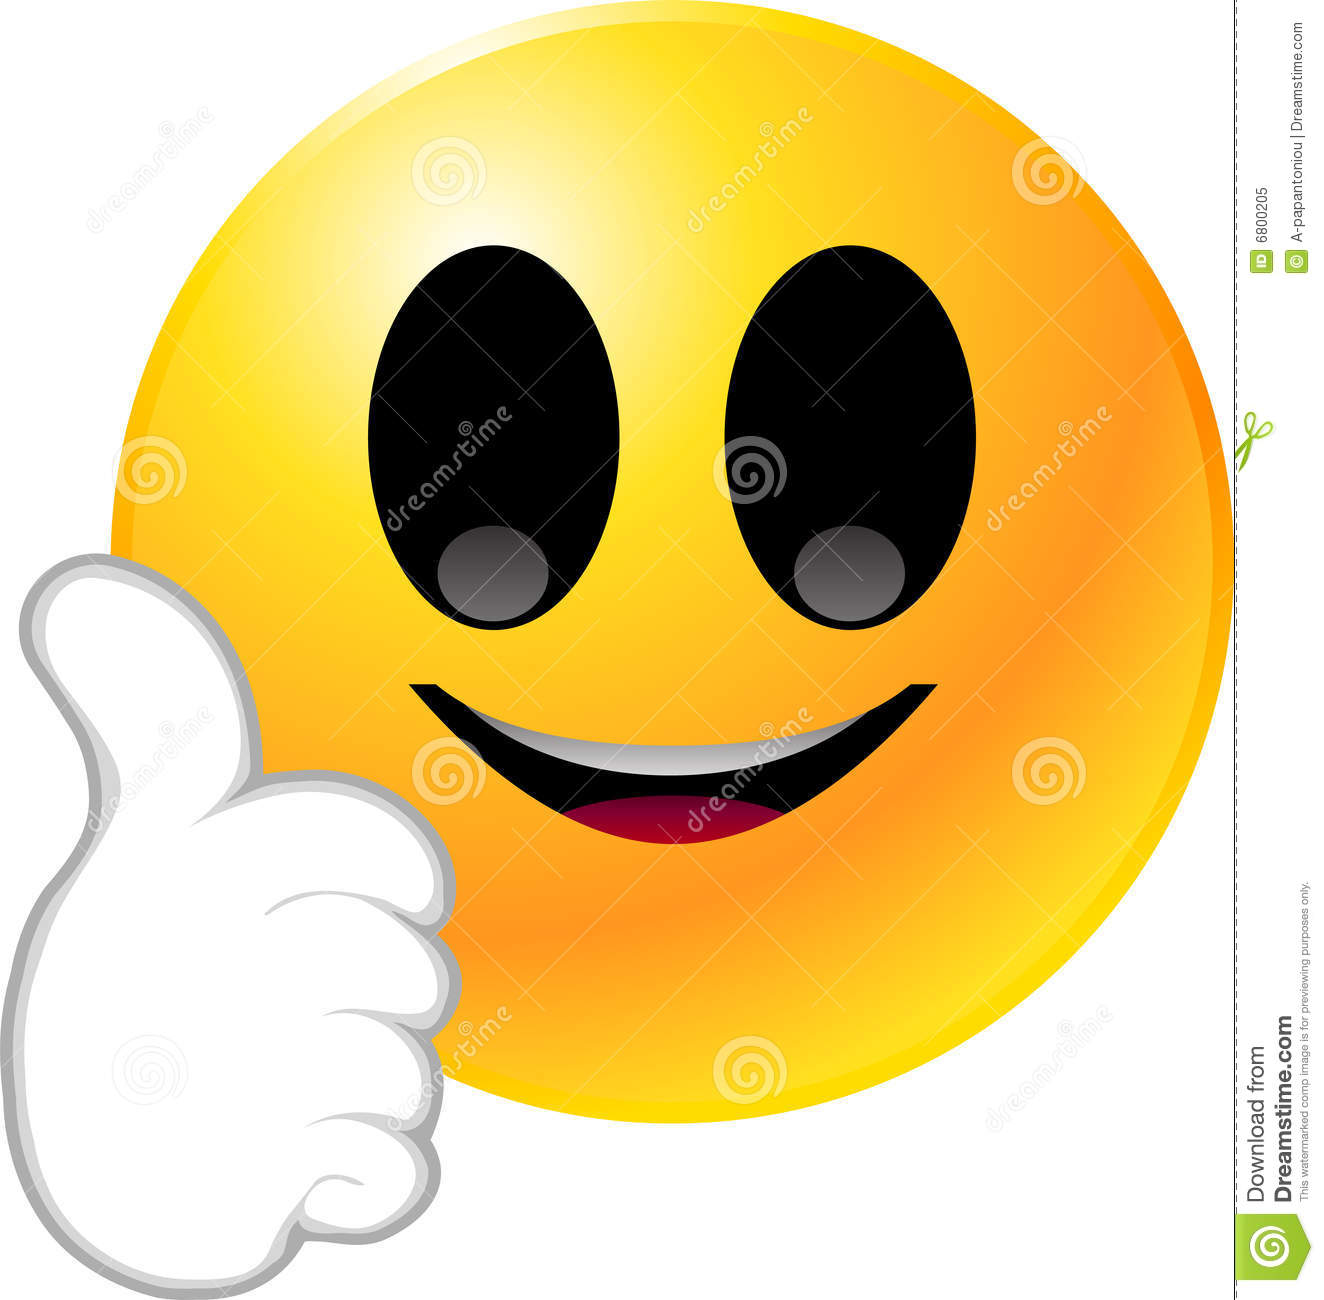 Smily icon free icons. Positive clipart smilie face